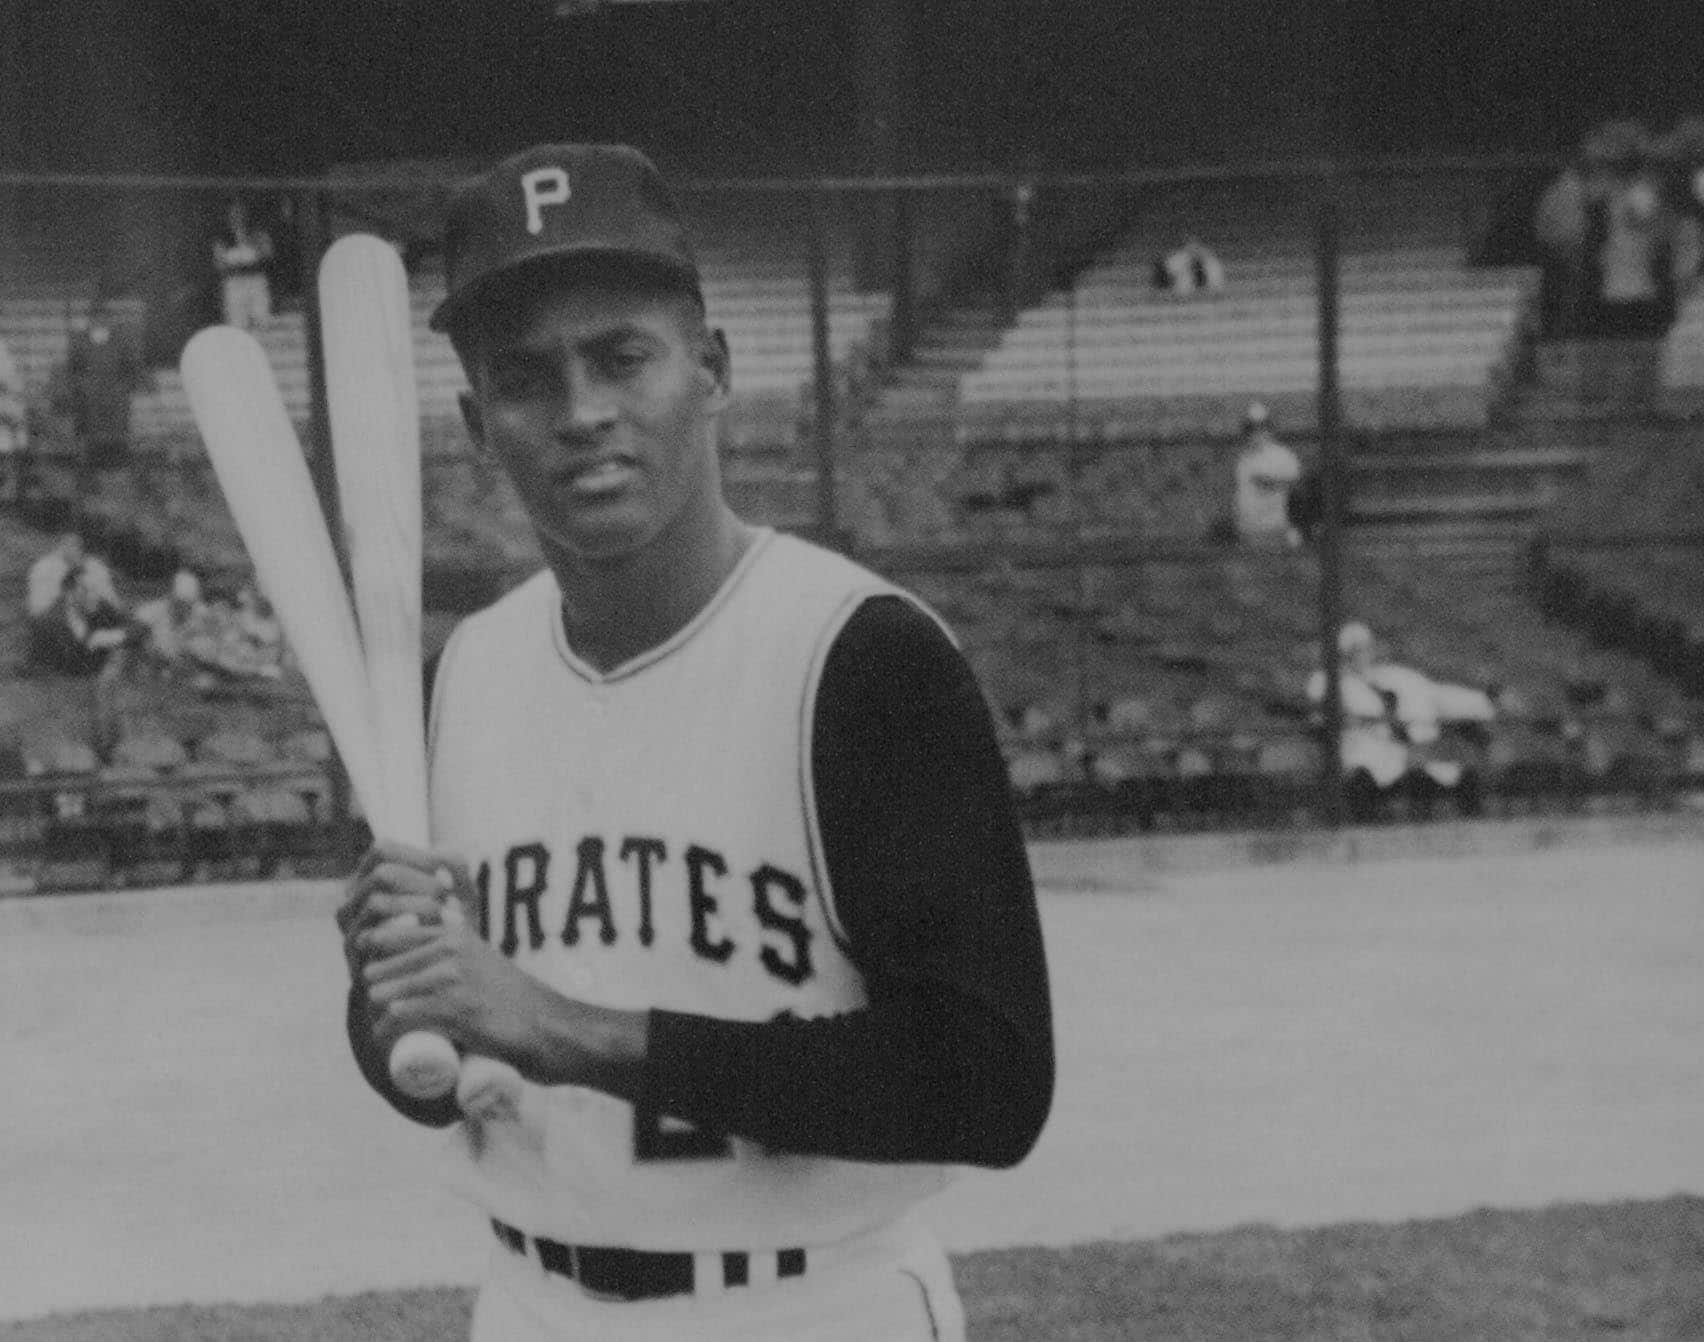 Afro-Boricua baseball star Roberto Clemente brings CT communities together  decades after his death